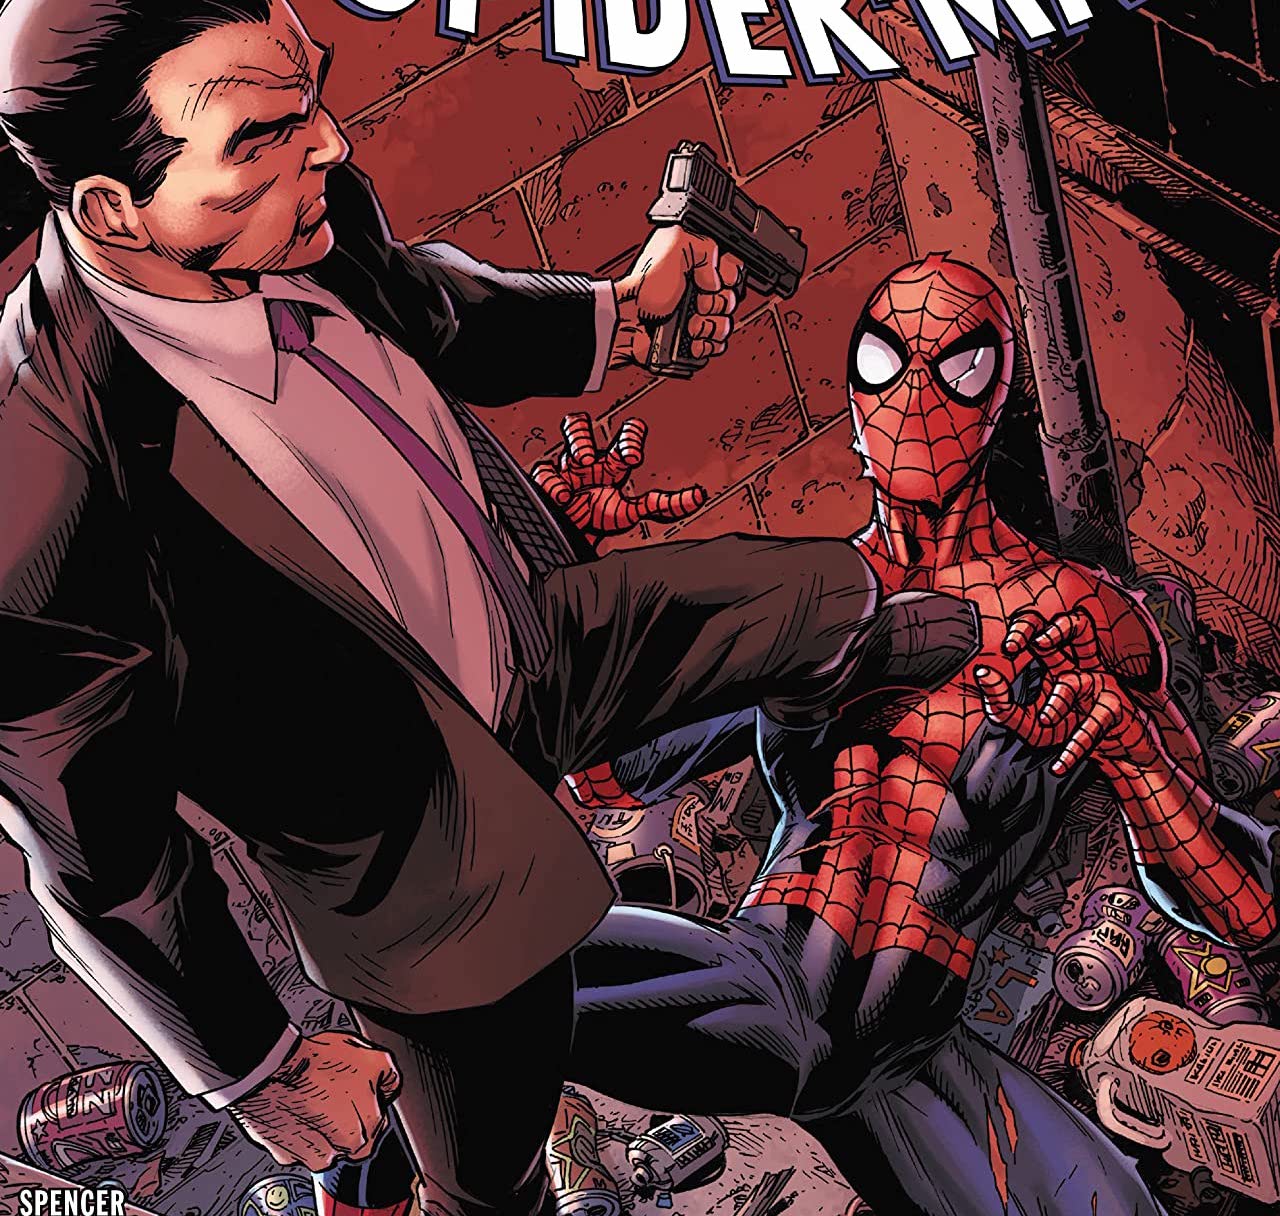 'Amazing Spider-Man' #68 barely moves the needle